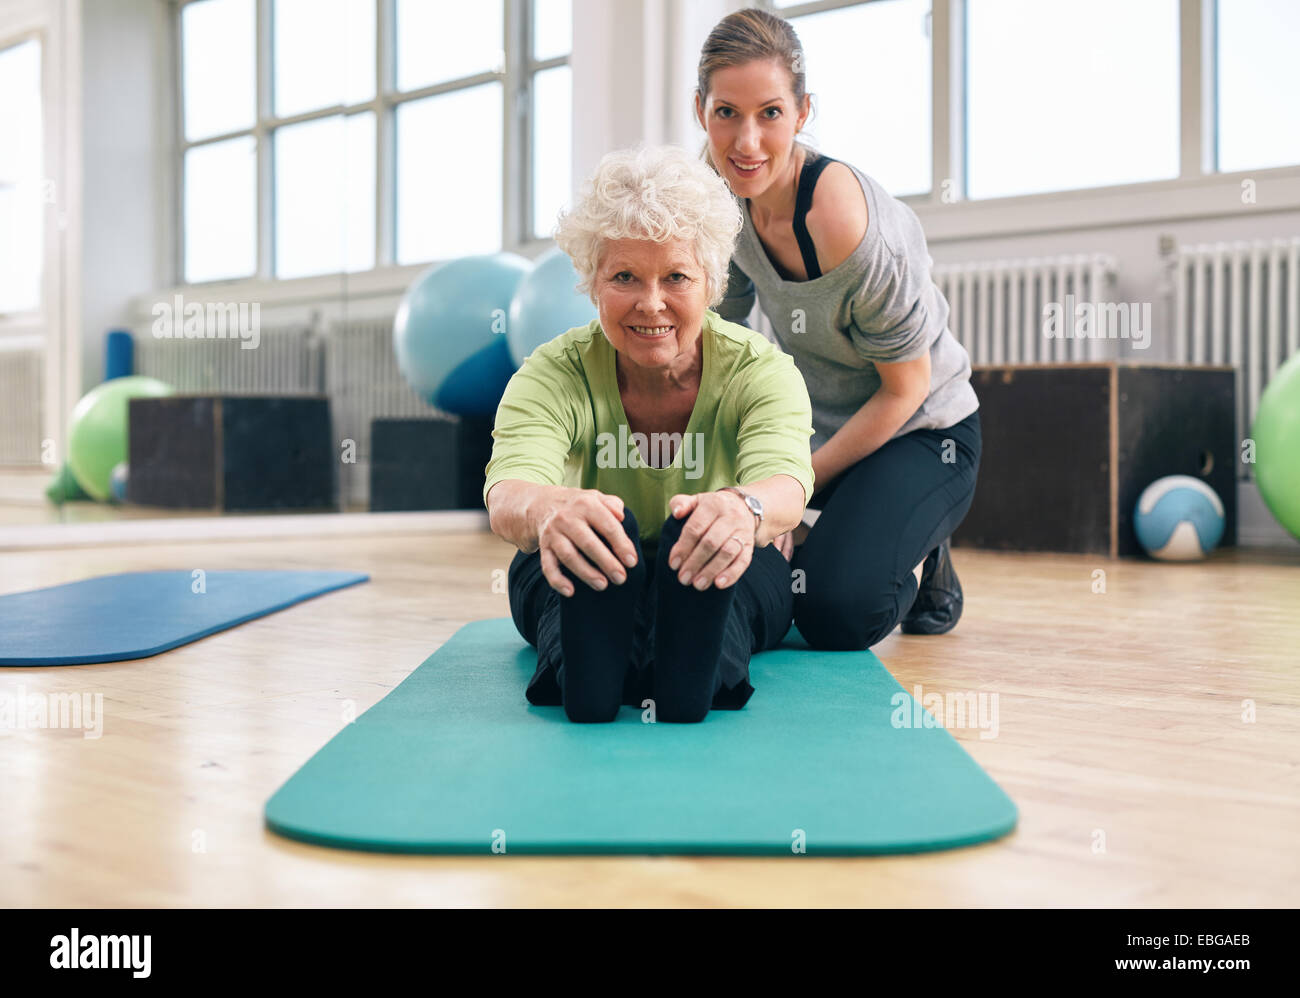 Senior woman sitting on exercise mat bending forward and touching her toes with her personal trainer assisting. Fitness training Stock Photo